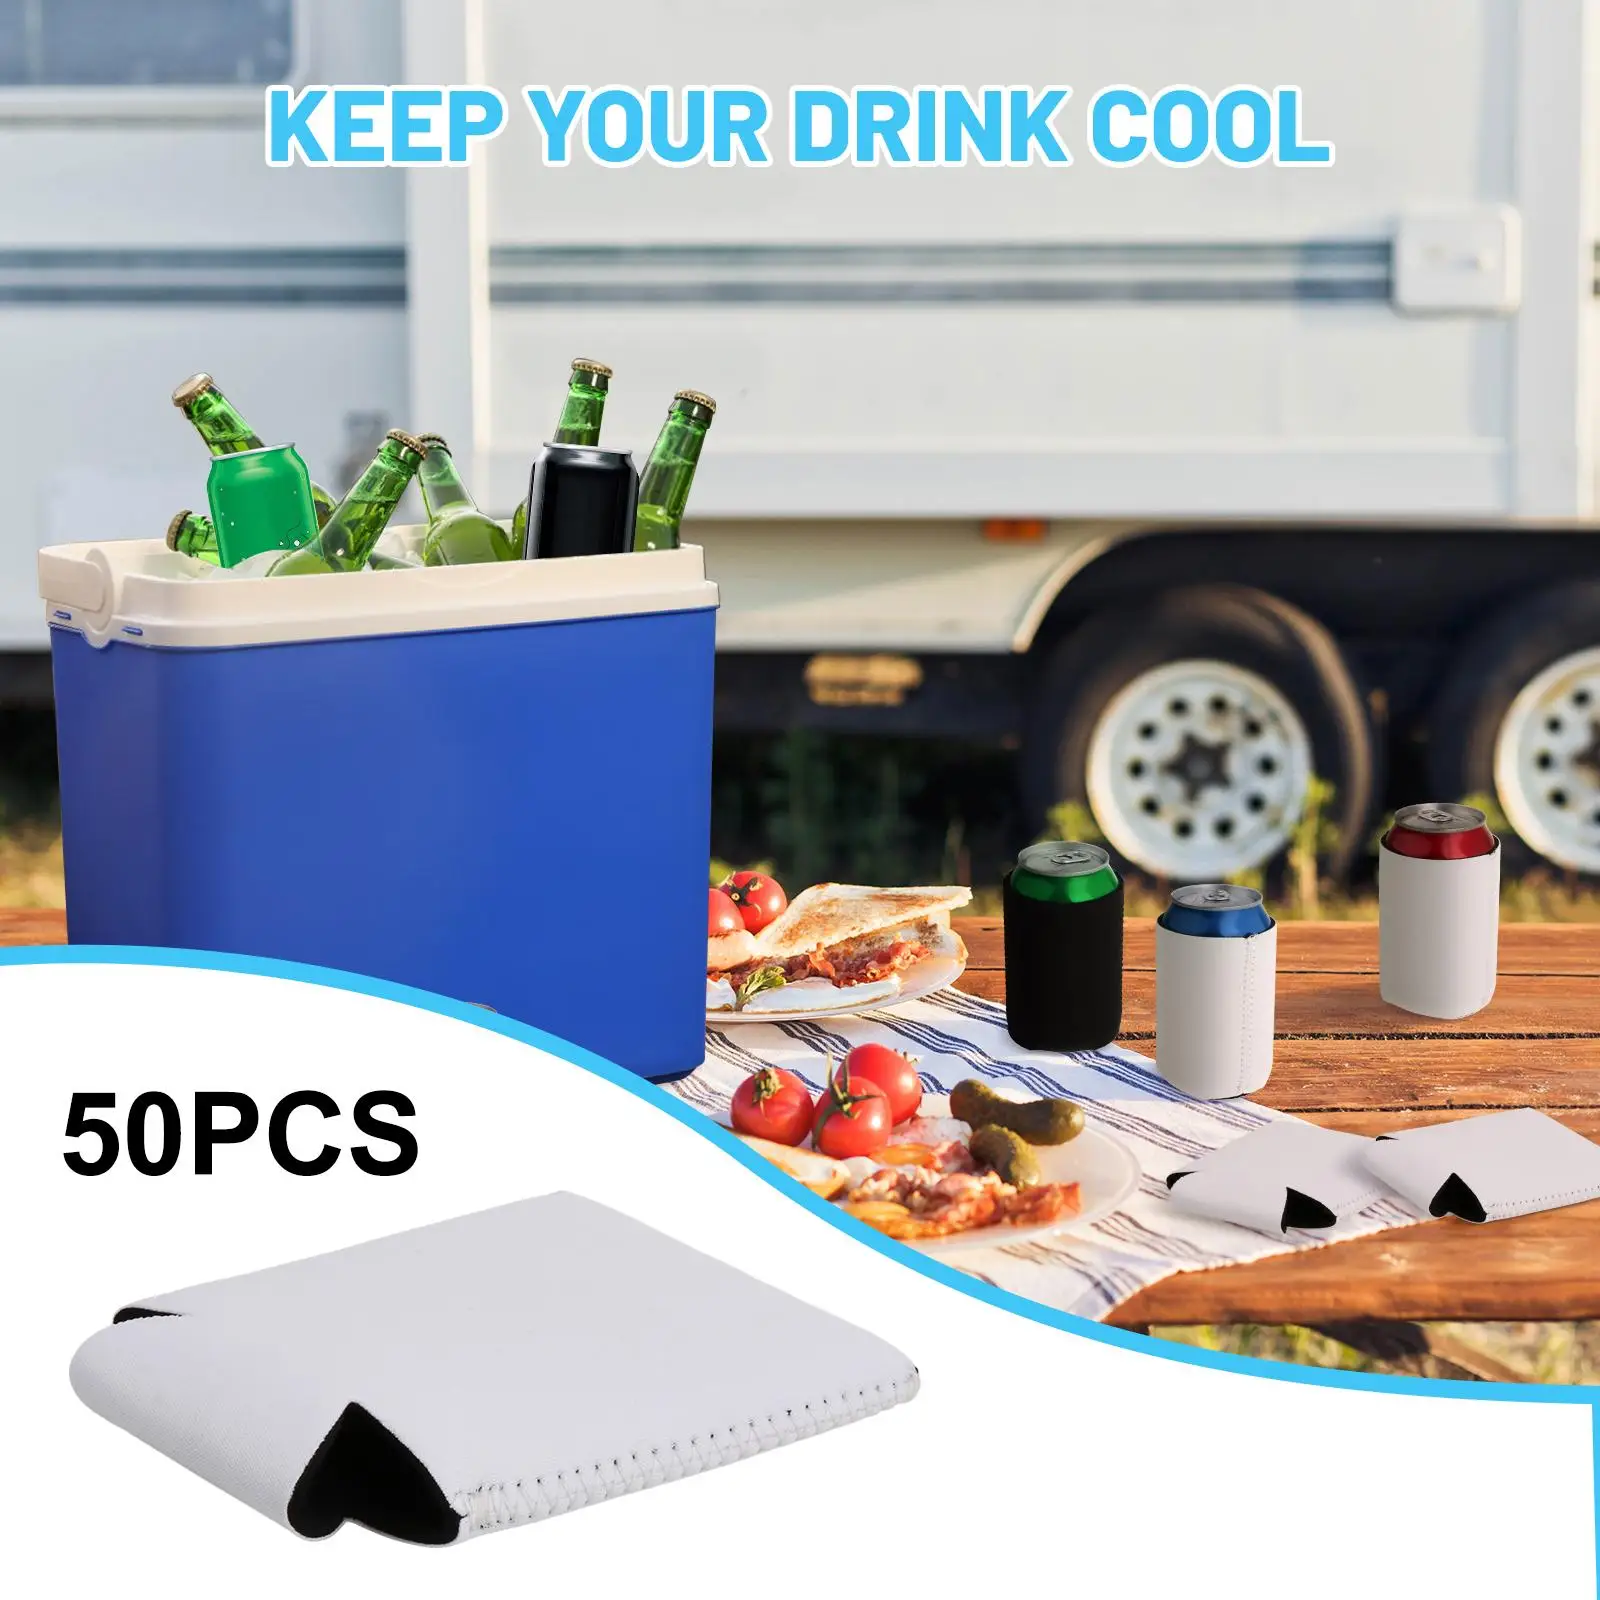 50Pcs Can Coolers Blank Can Coolers Sleeves Water Bottle Sleeves Collapsible Cover for Soda, Beer, Water Bottles HTV Projects